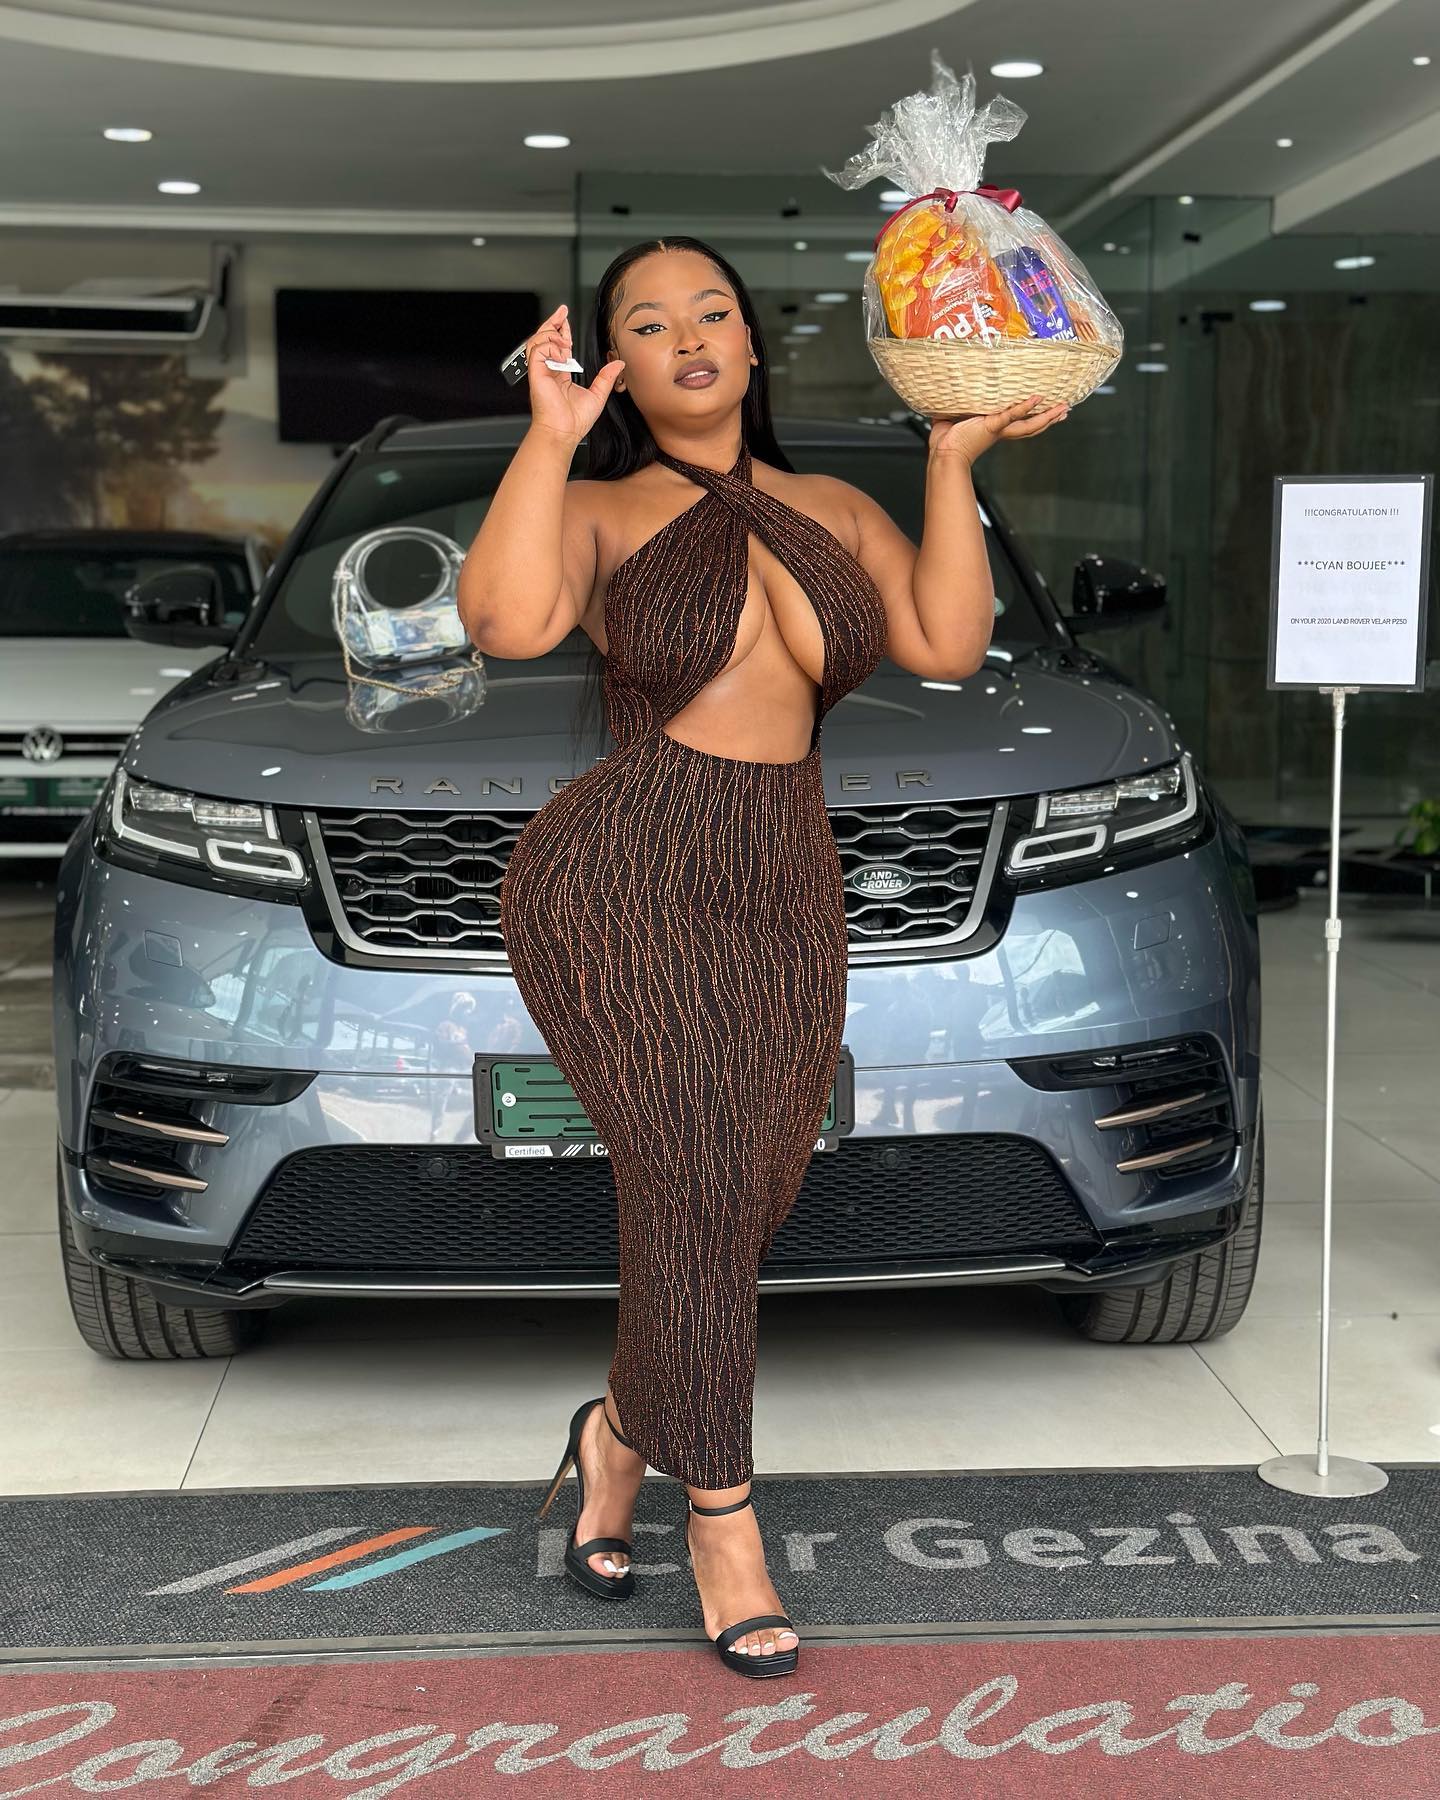 Cyan Boujee is attracting attention with her newly acquired Land Rover Velar. 24